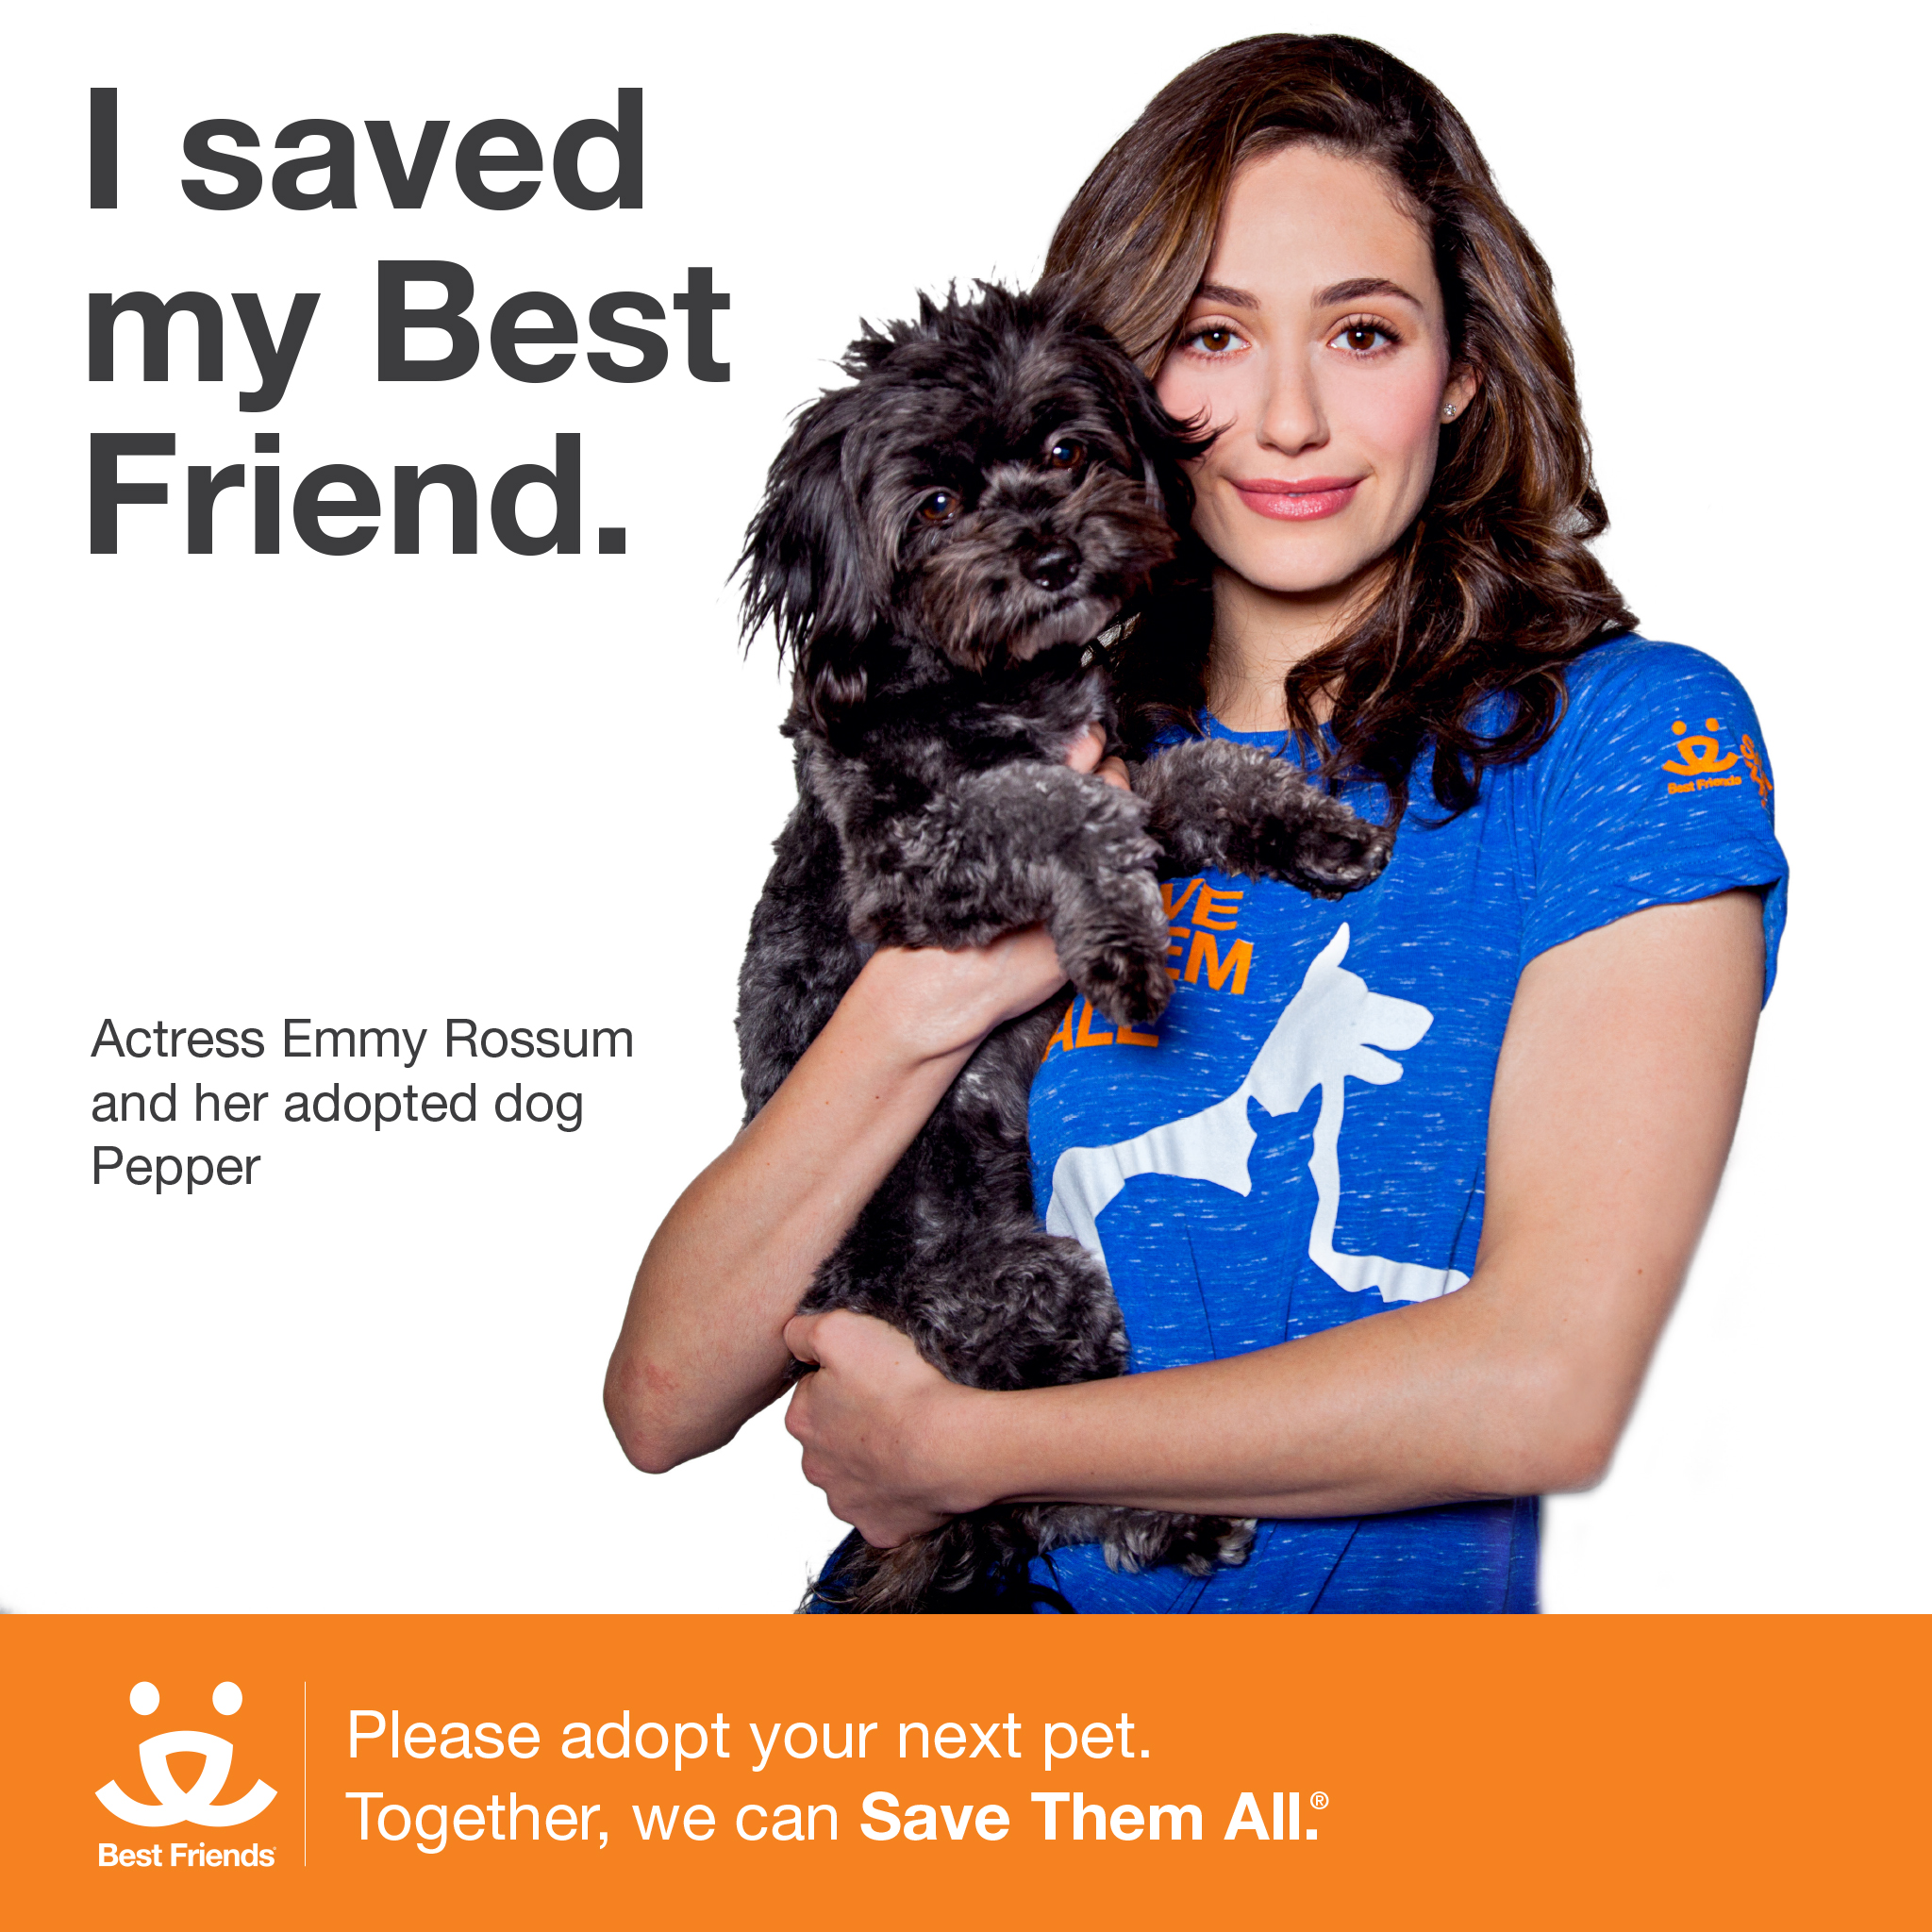 Emmy Rossum, star of 'Shameless' joins Best Friends 'I Save' photo campaign